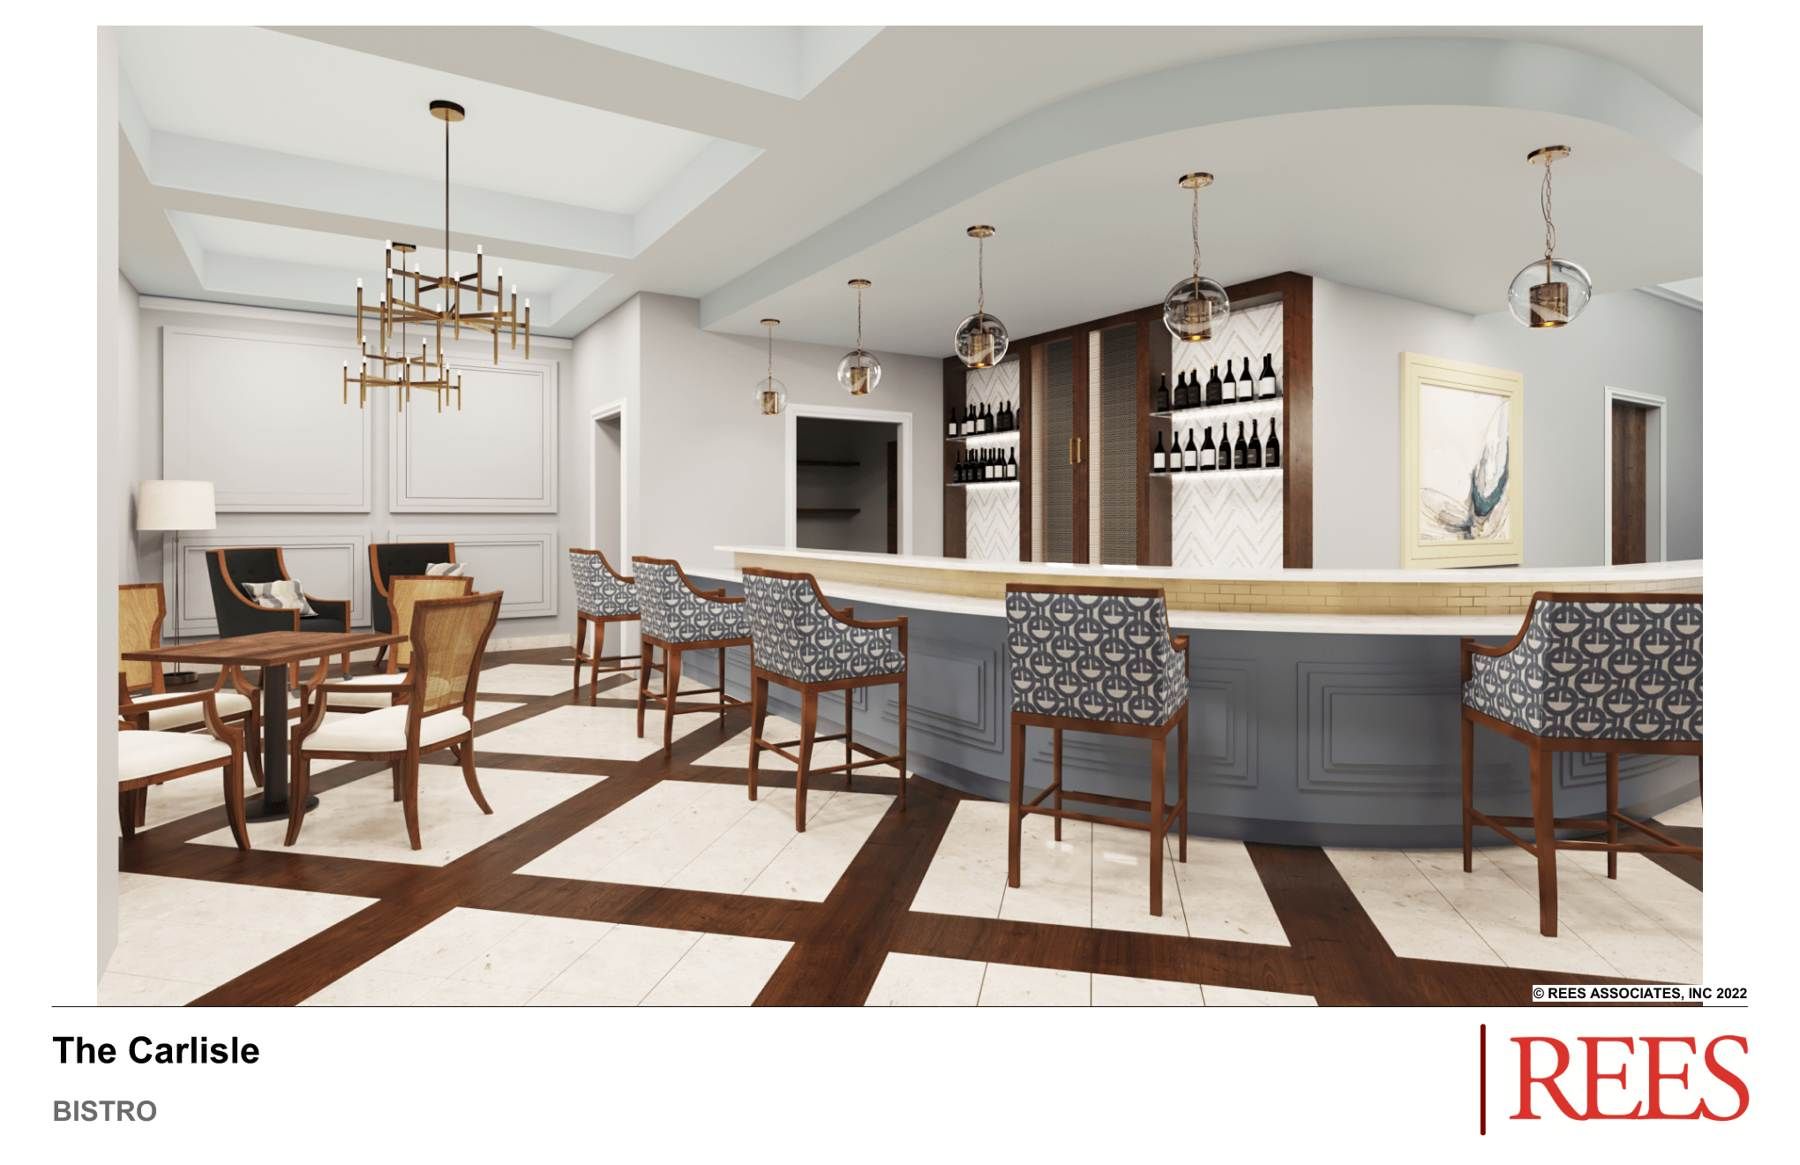 Interior view of The Carlisle Palm Beach senior living community featuring dining and living areas.